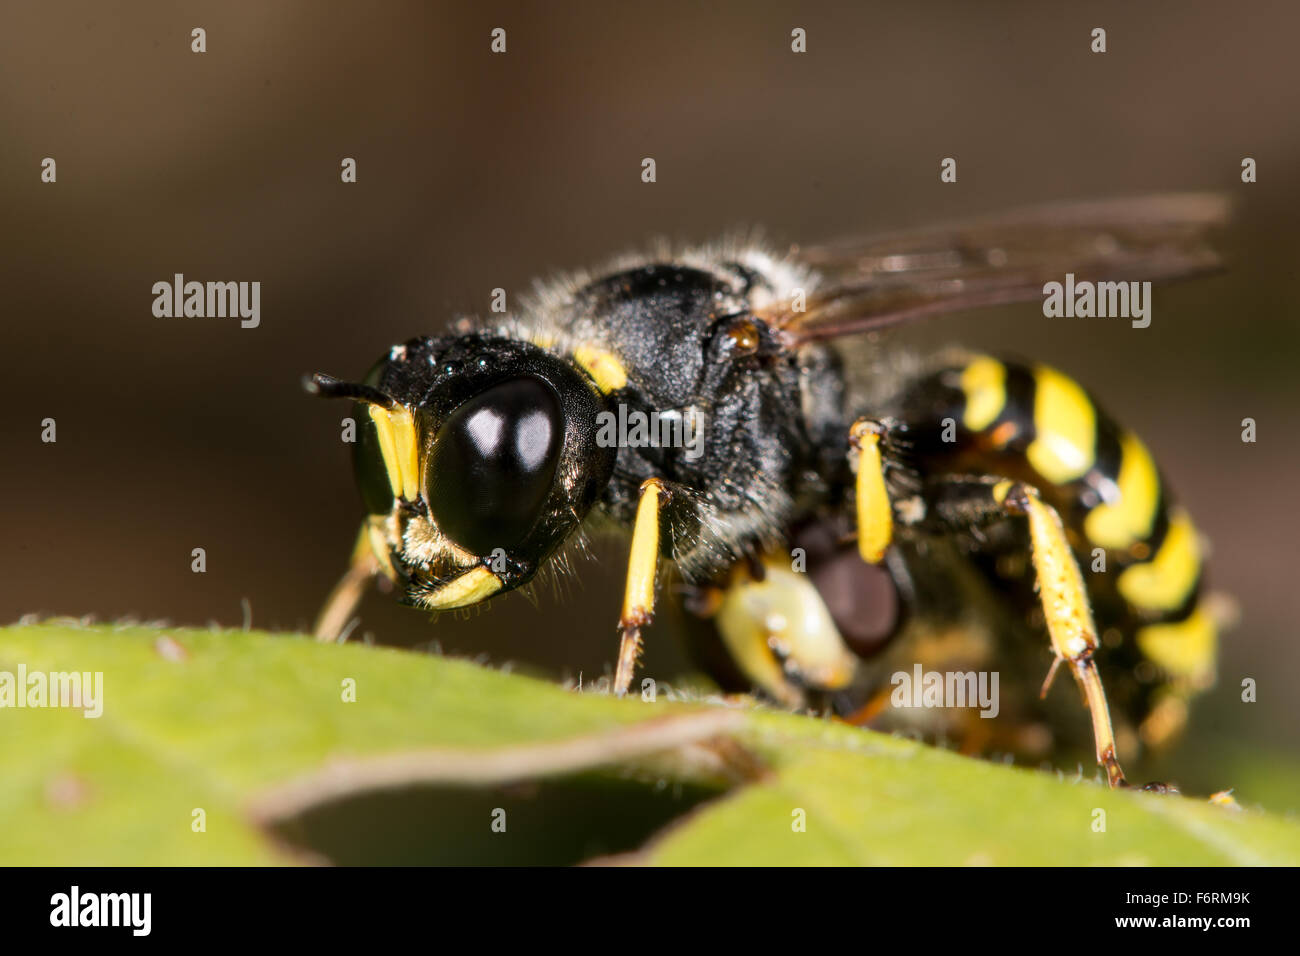 A digger wasp, Ectemnius cephalotes, with hoverfly prey Stock Photo